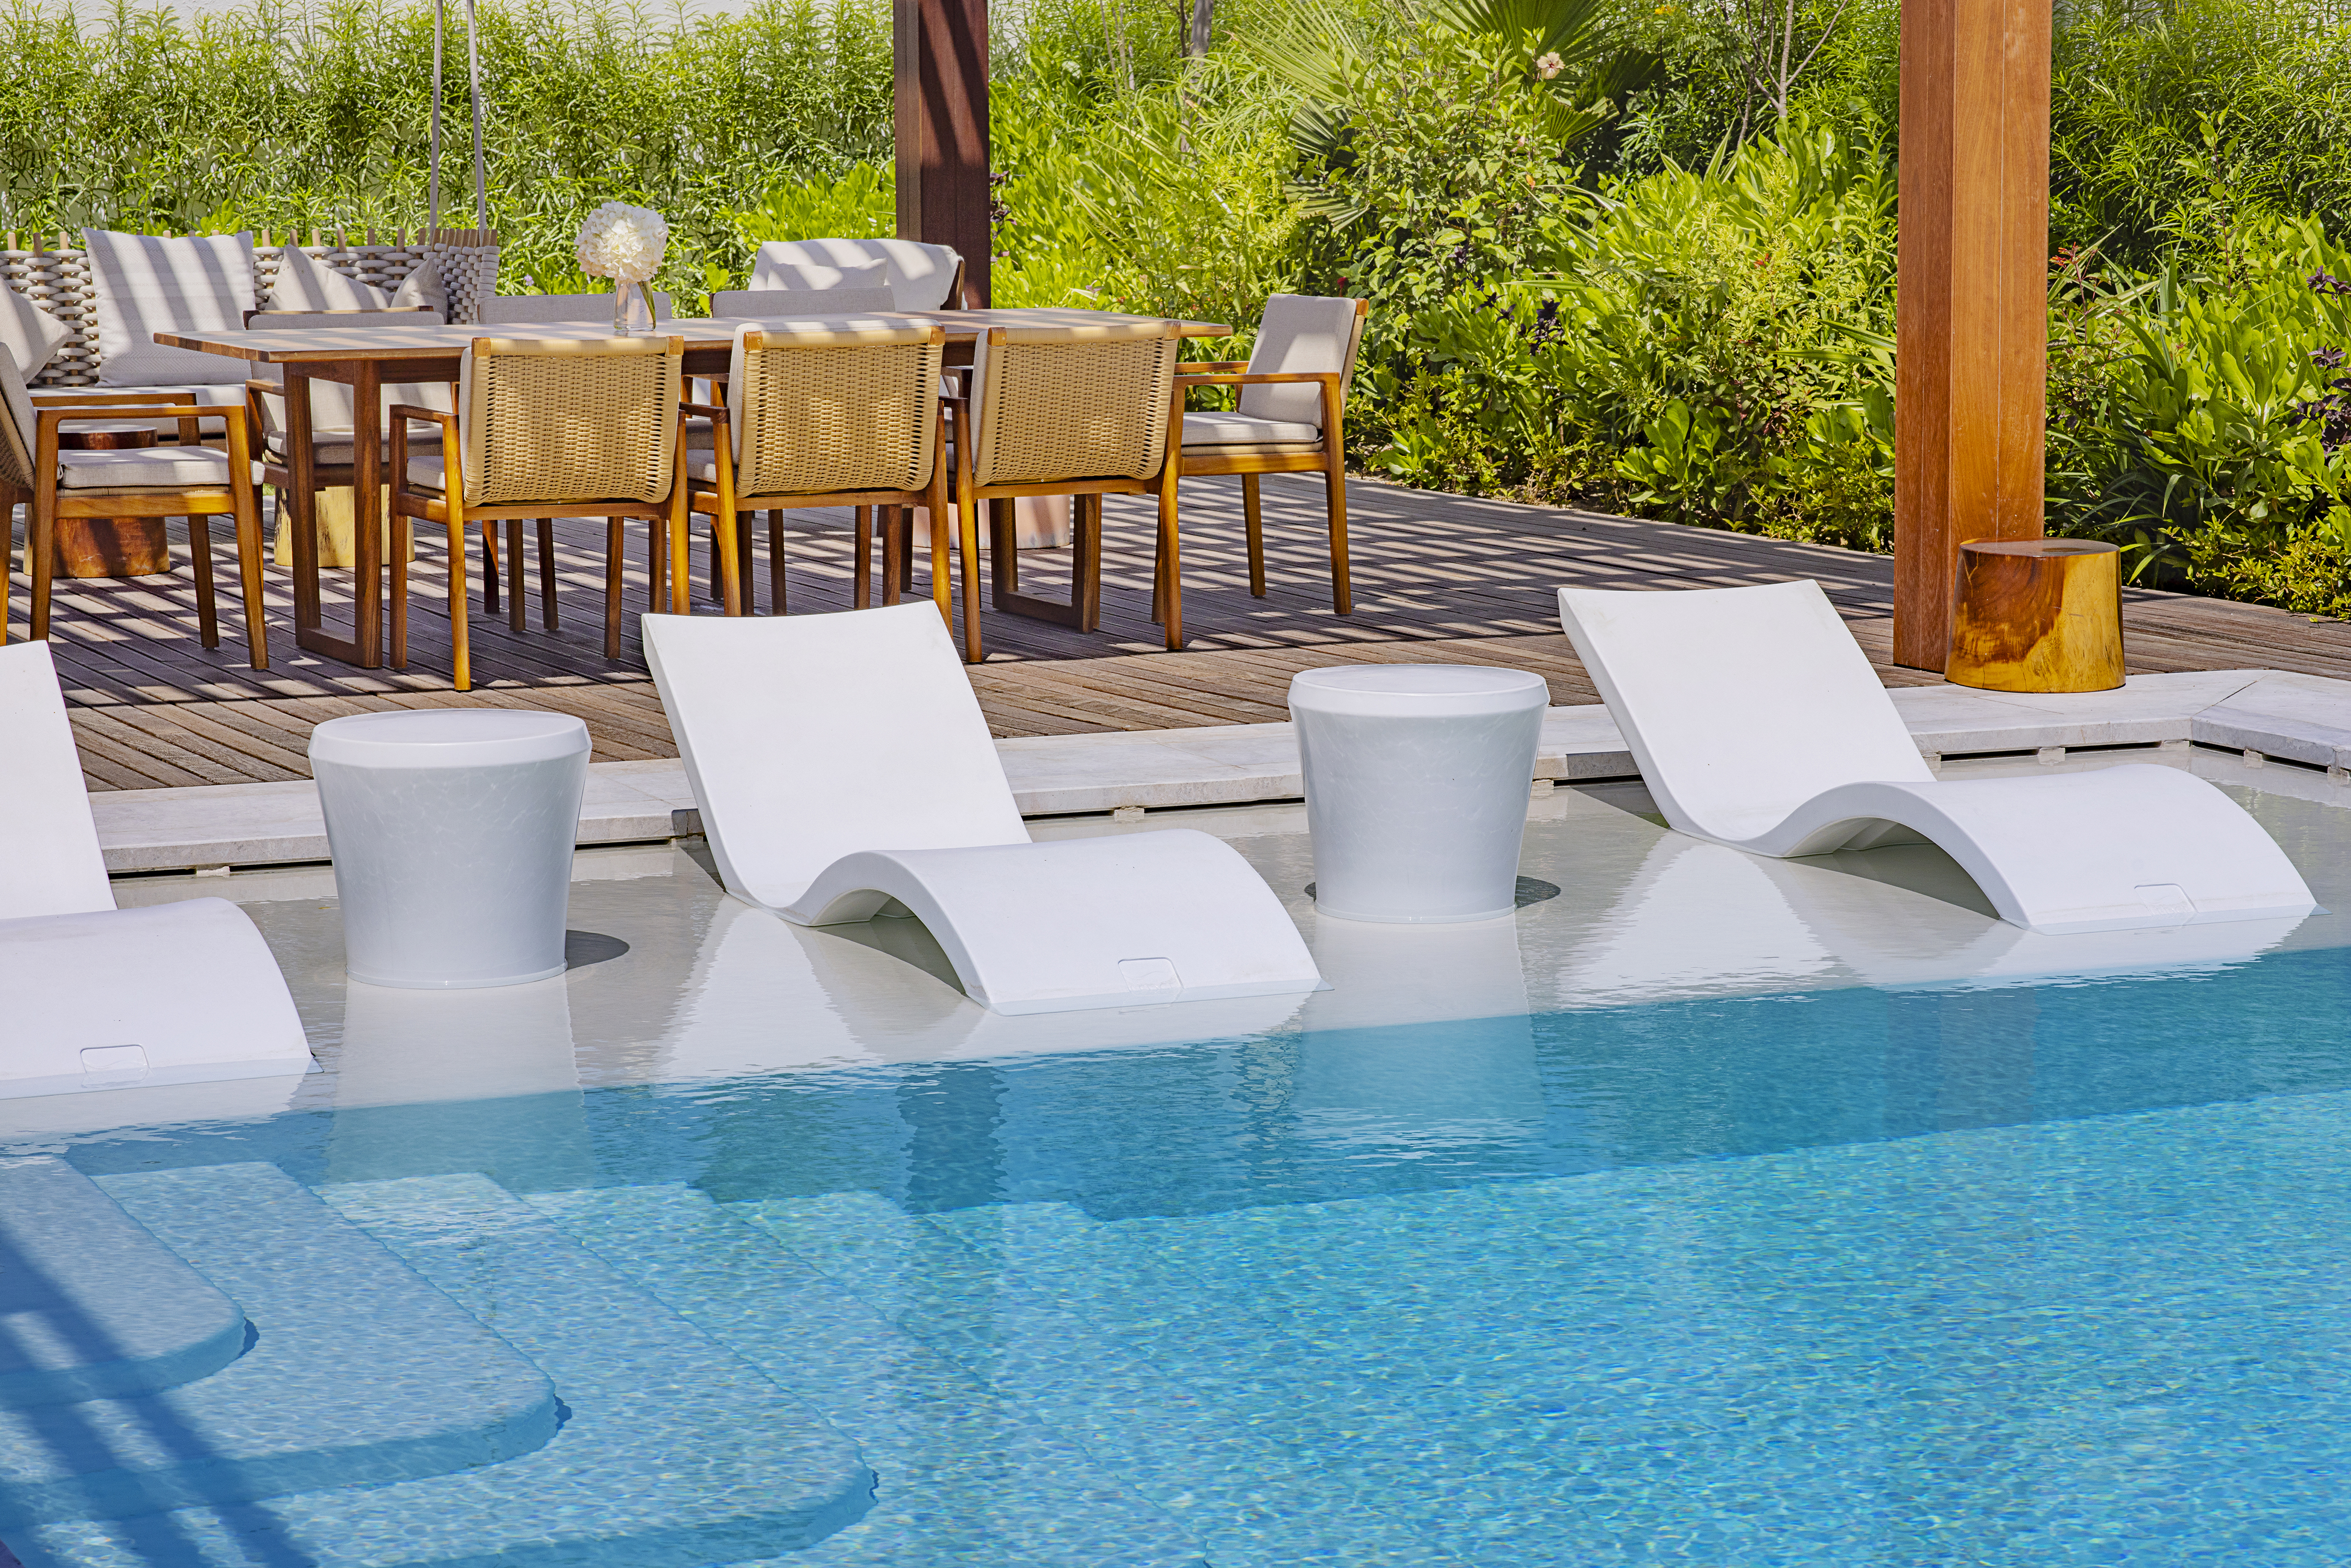 Suite - Private Outdoor Pool Area with Seats